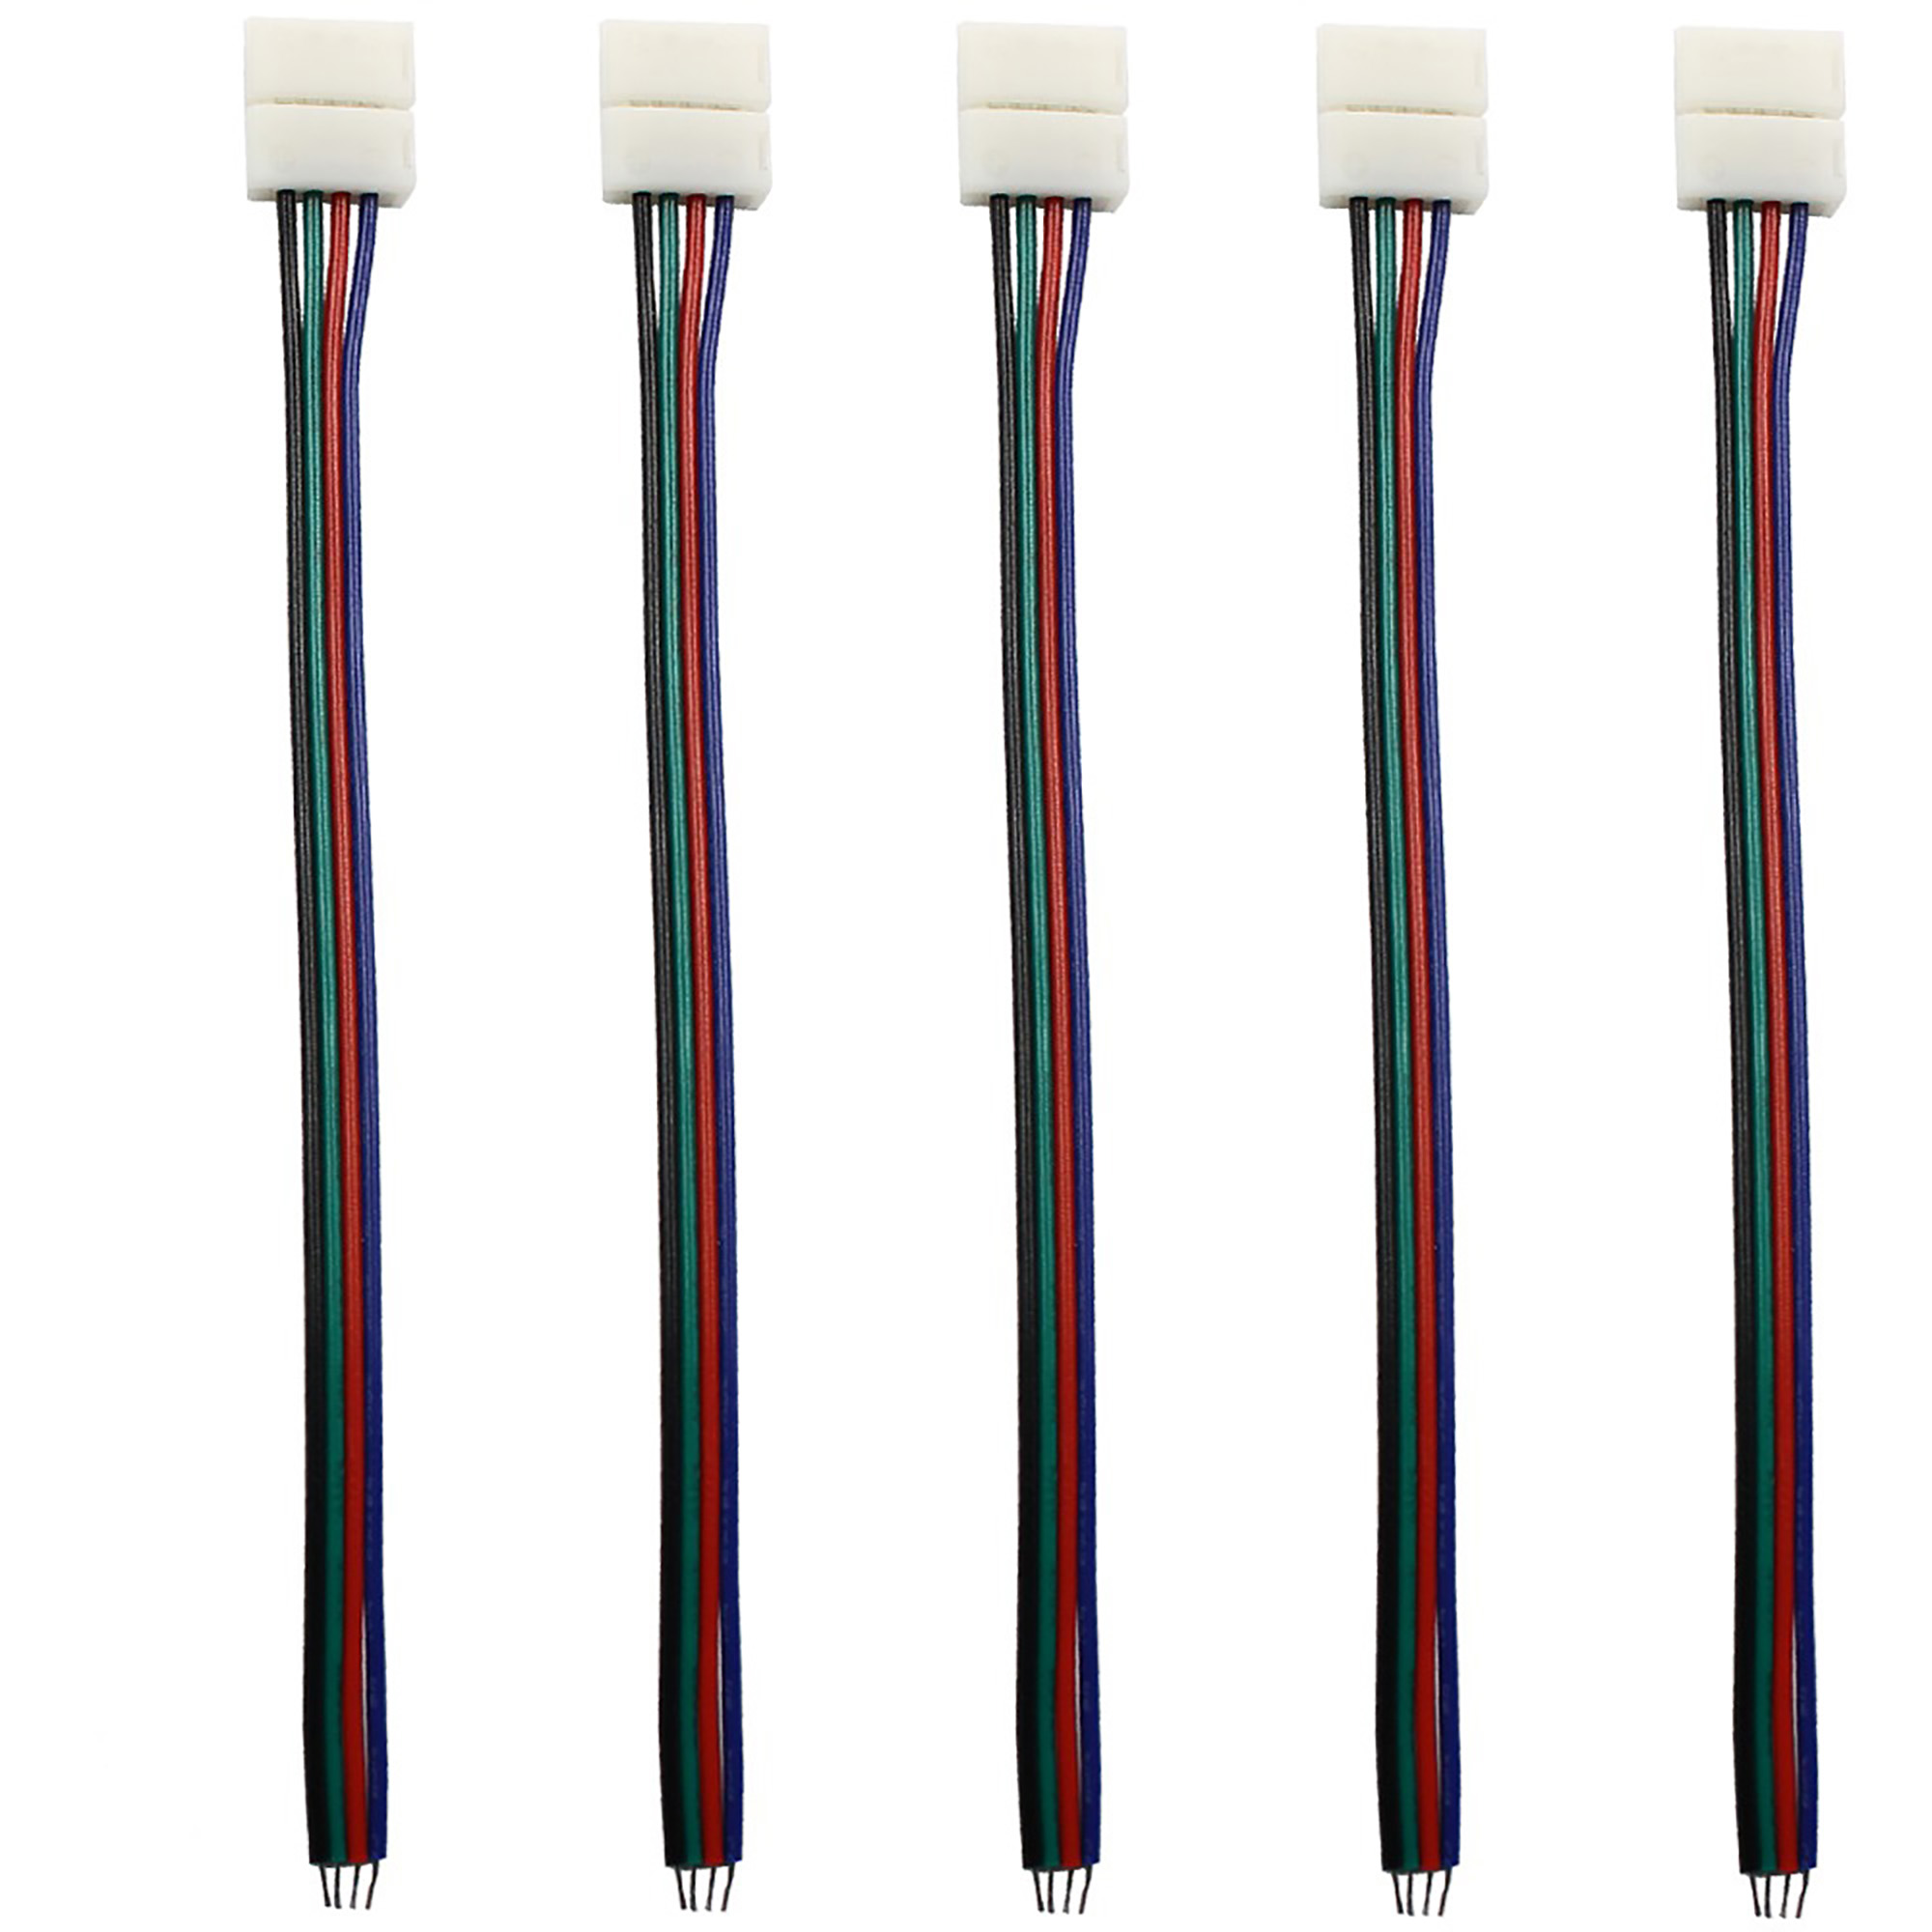 80103  (Pack Of 5) Single Ended RGB Connector